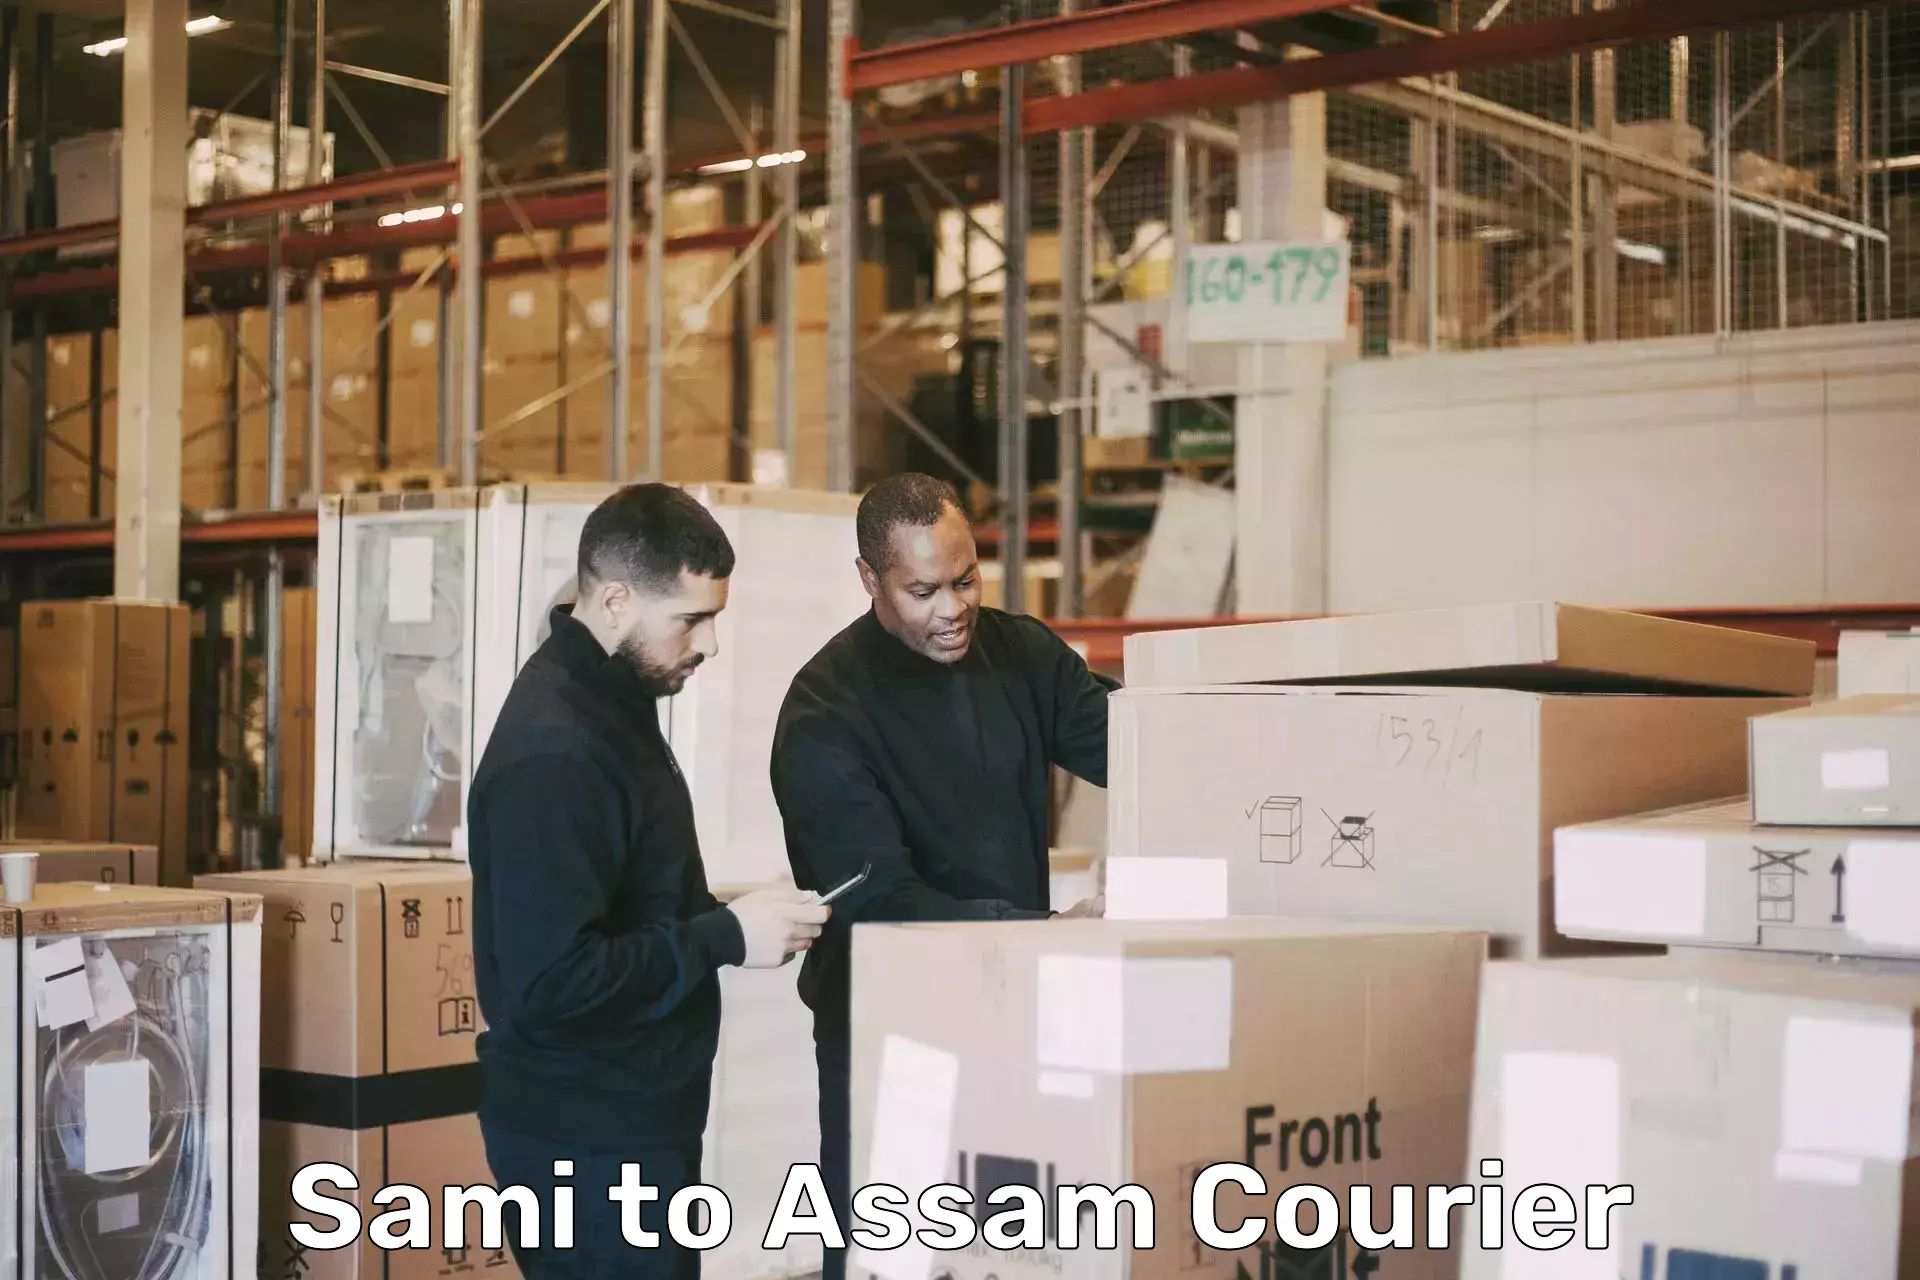 Trusted relocation experts Sami to Mariani